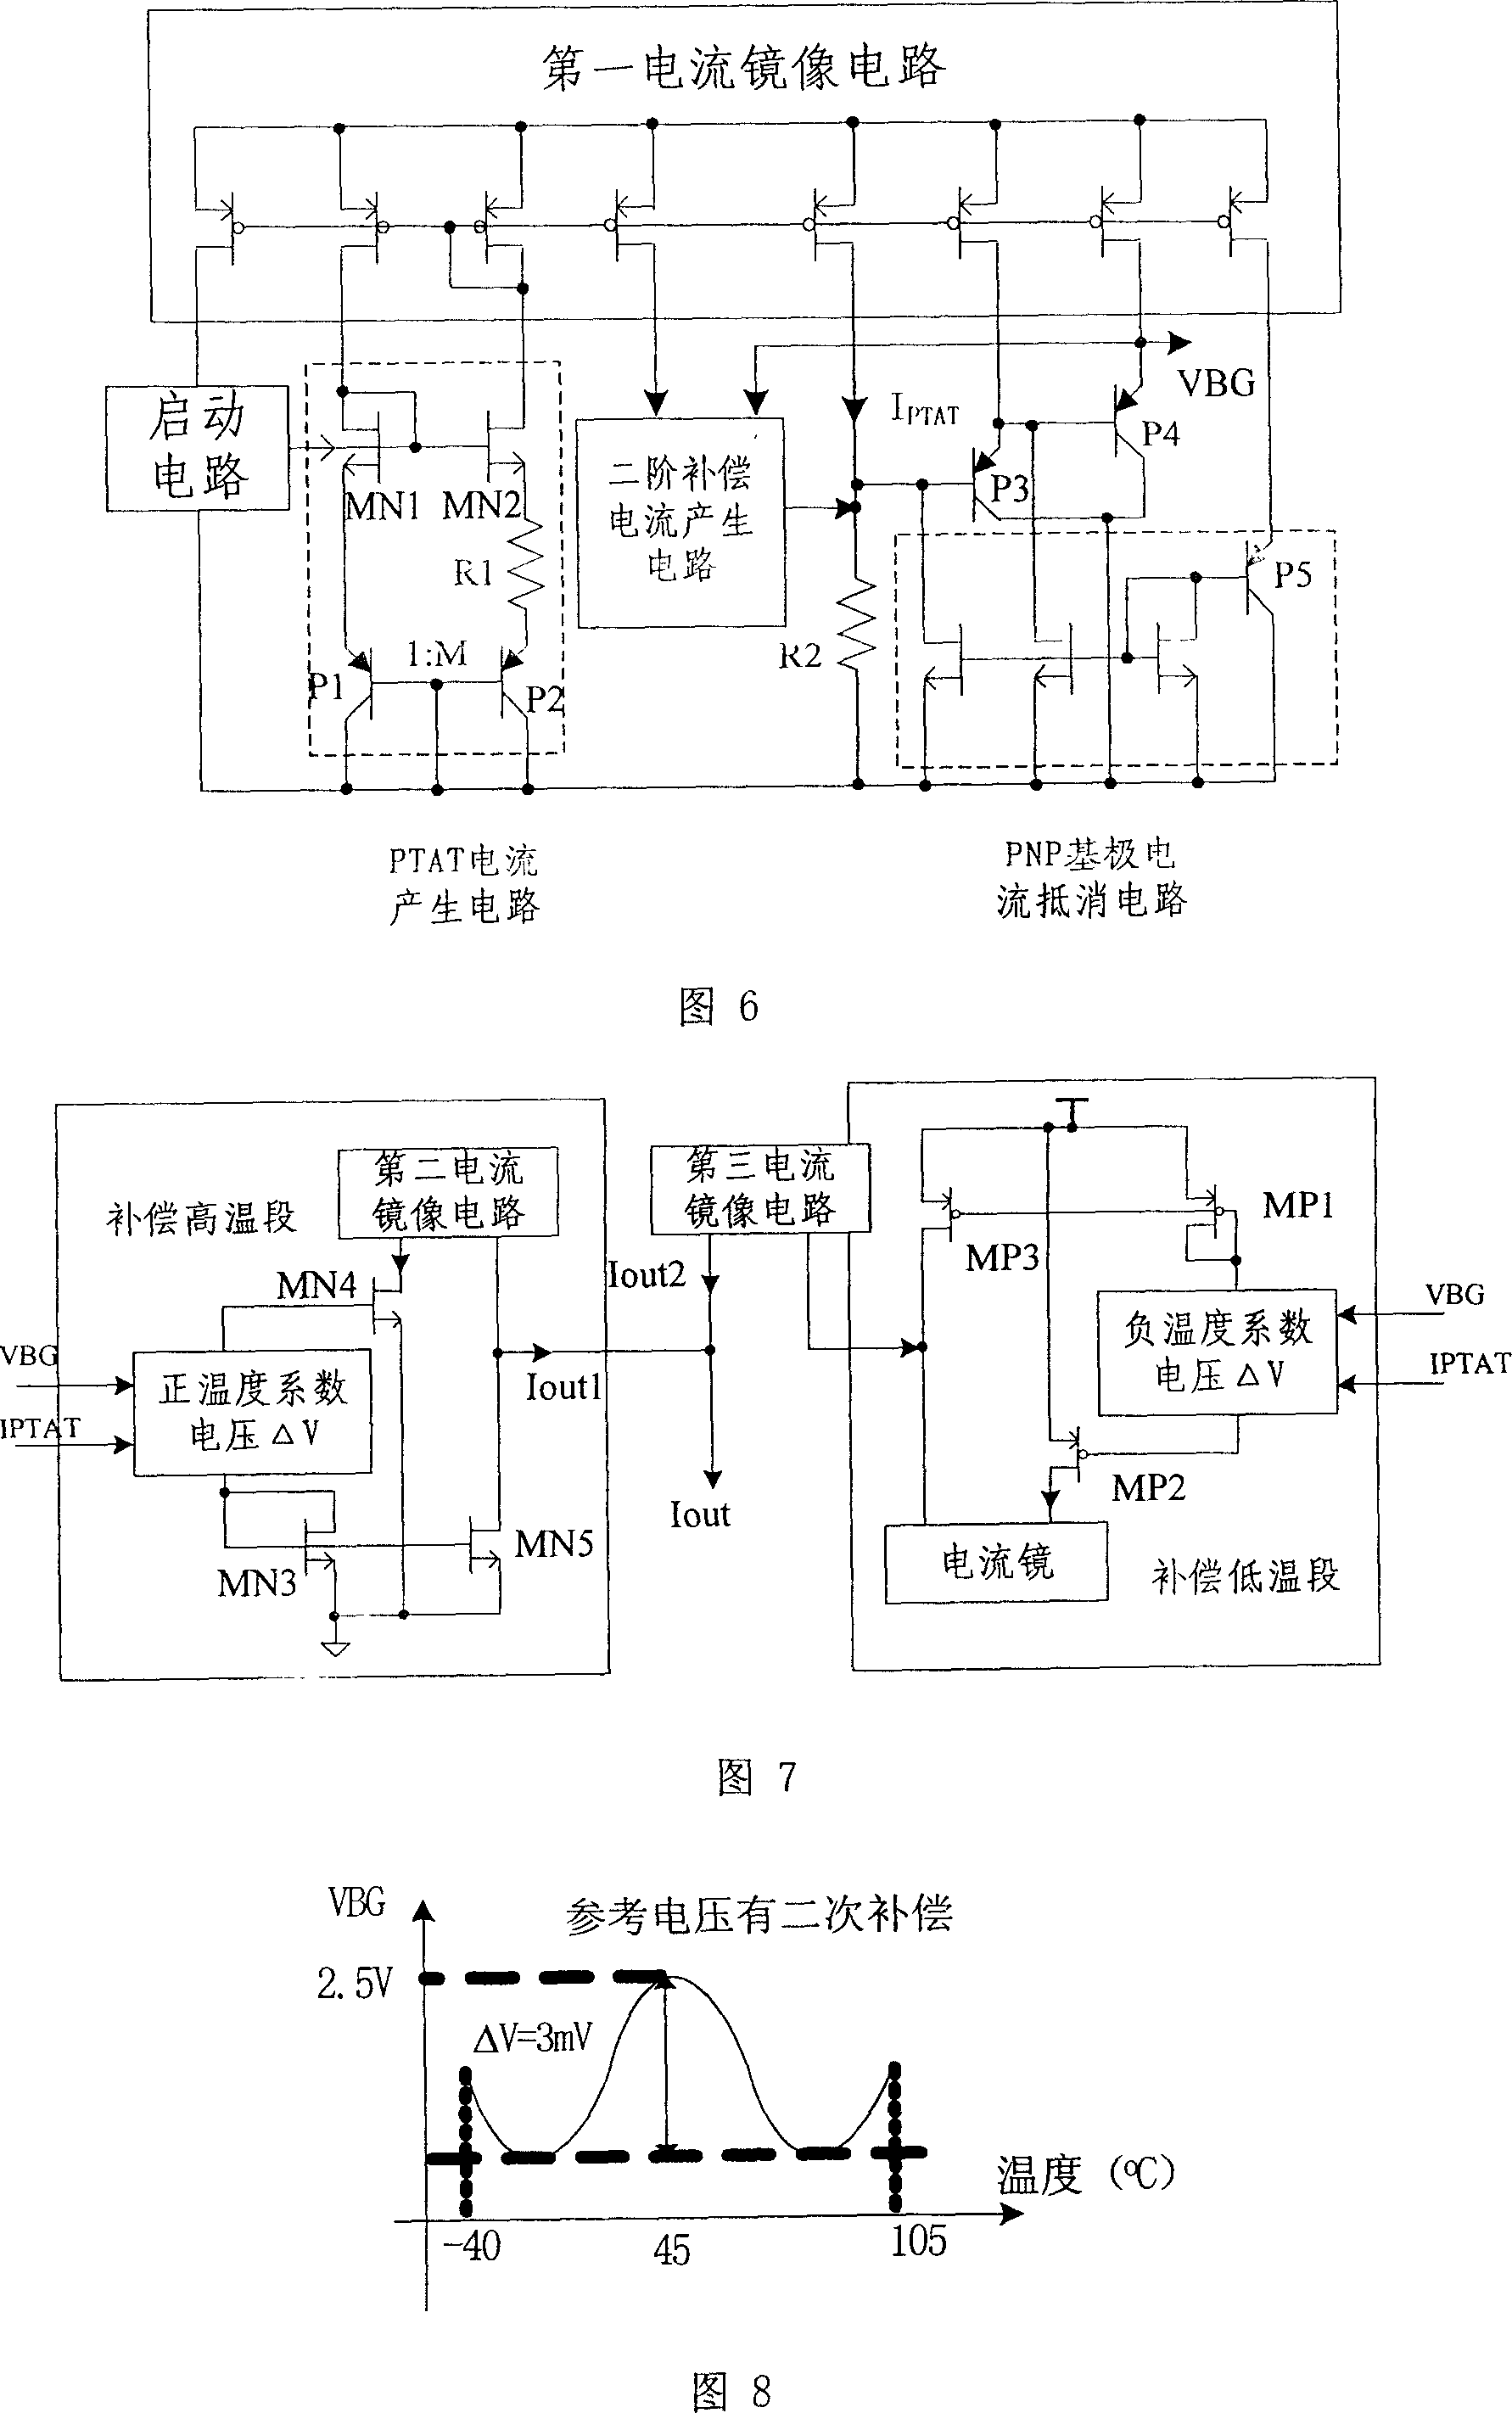 Reference voltage source for low temperature coefficient with gap